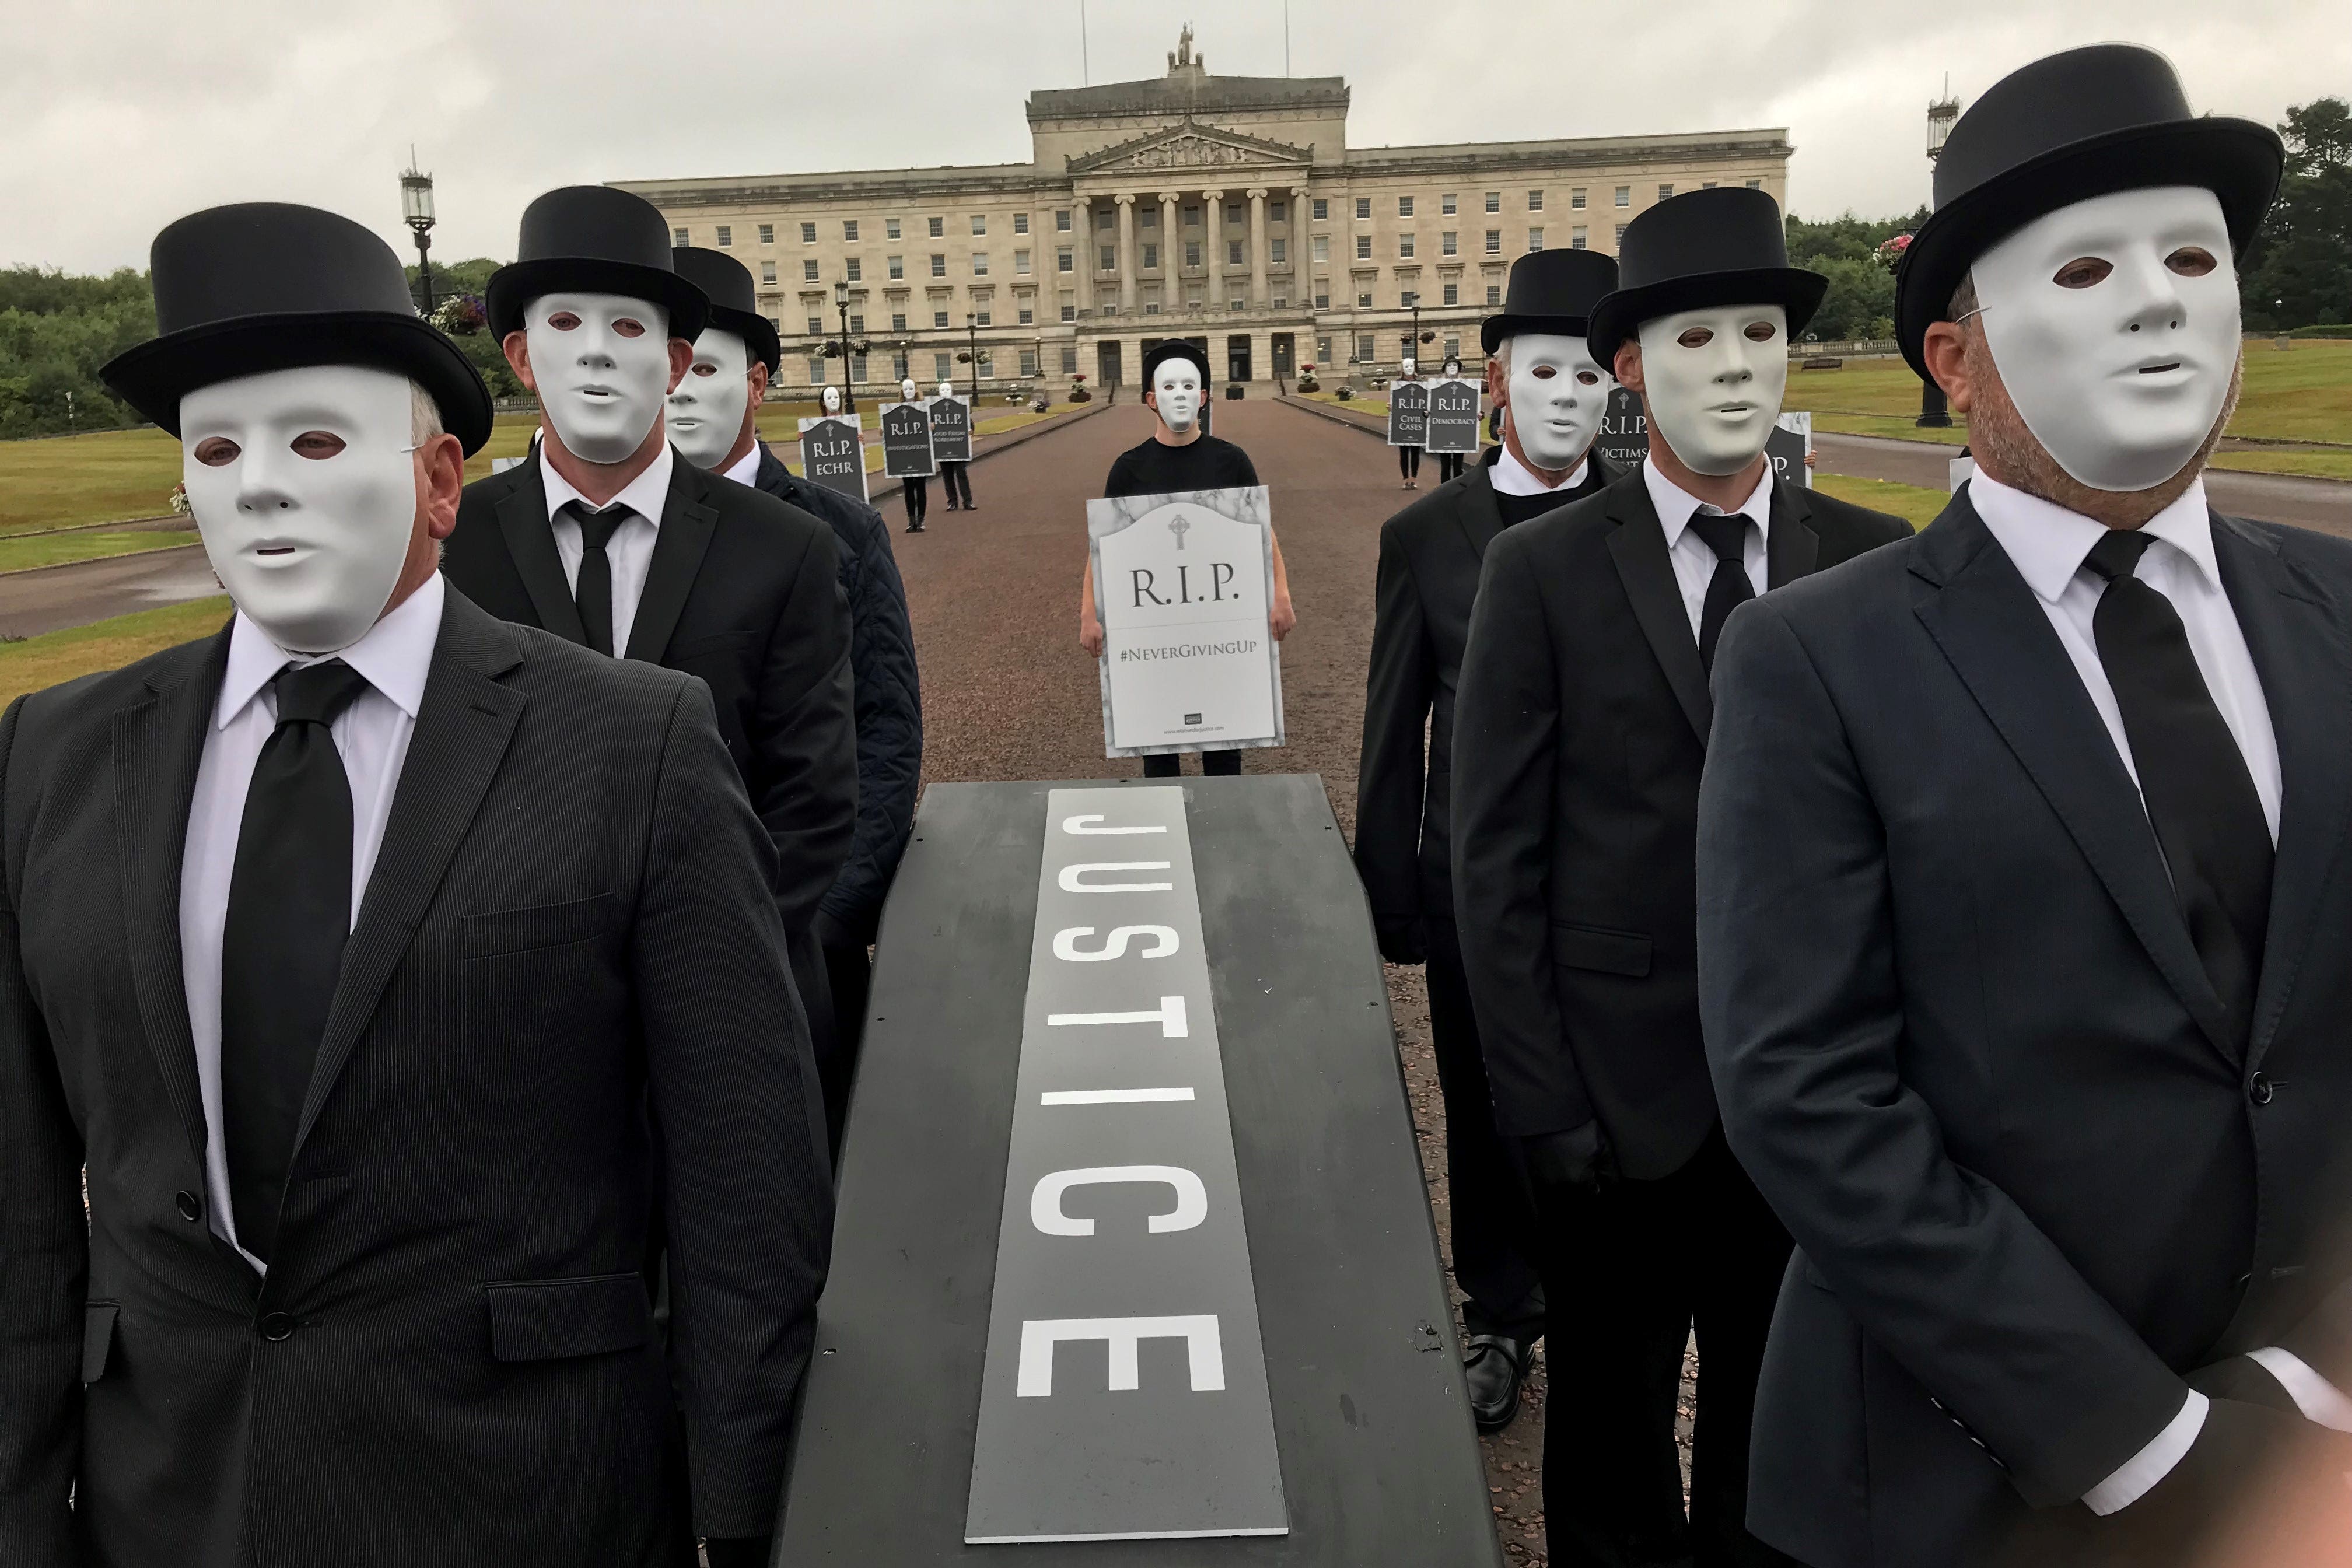 A number of protests took place against the Legacy Act, which created the Independent Commission for Reconciliation and Information Recovery (Jonathan McCambridge/PA)